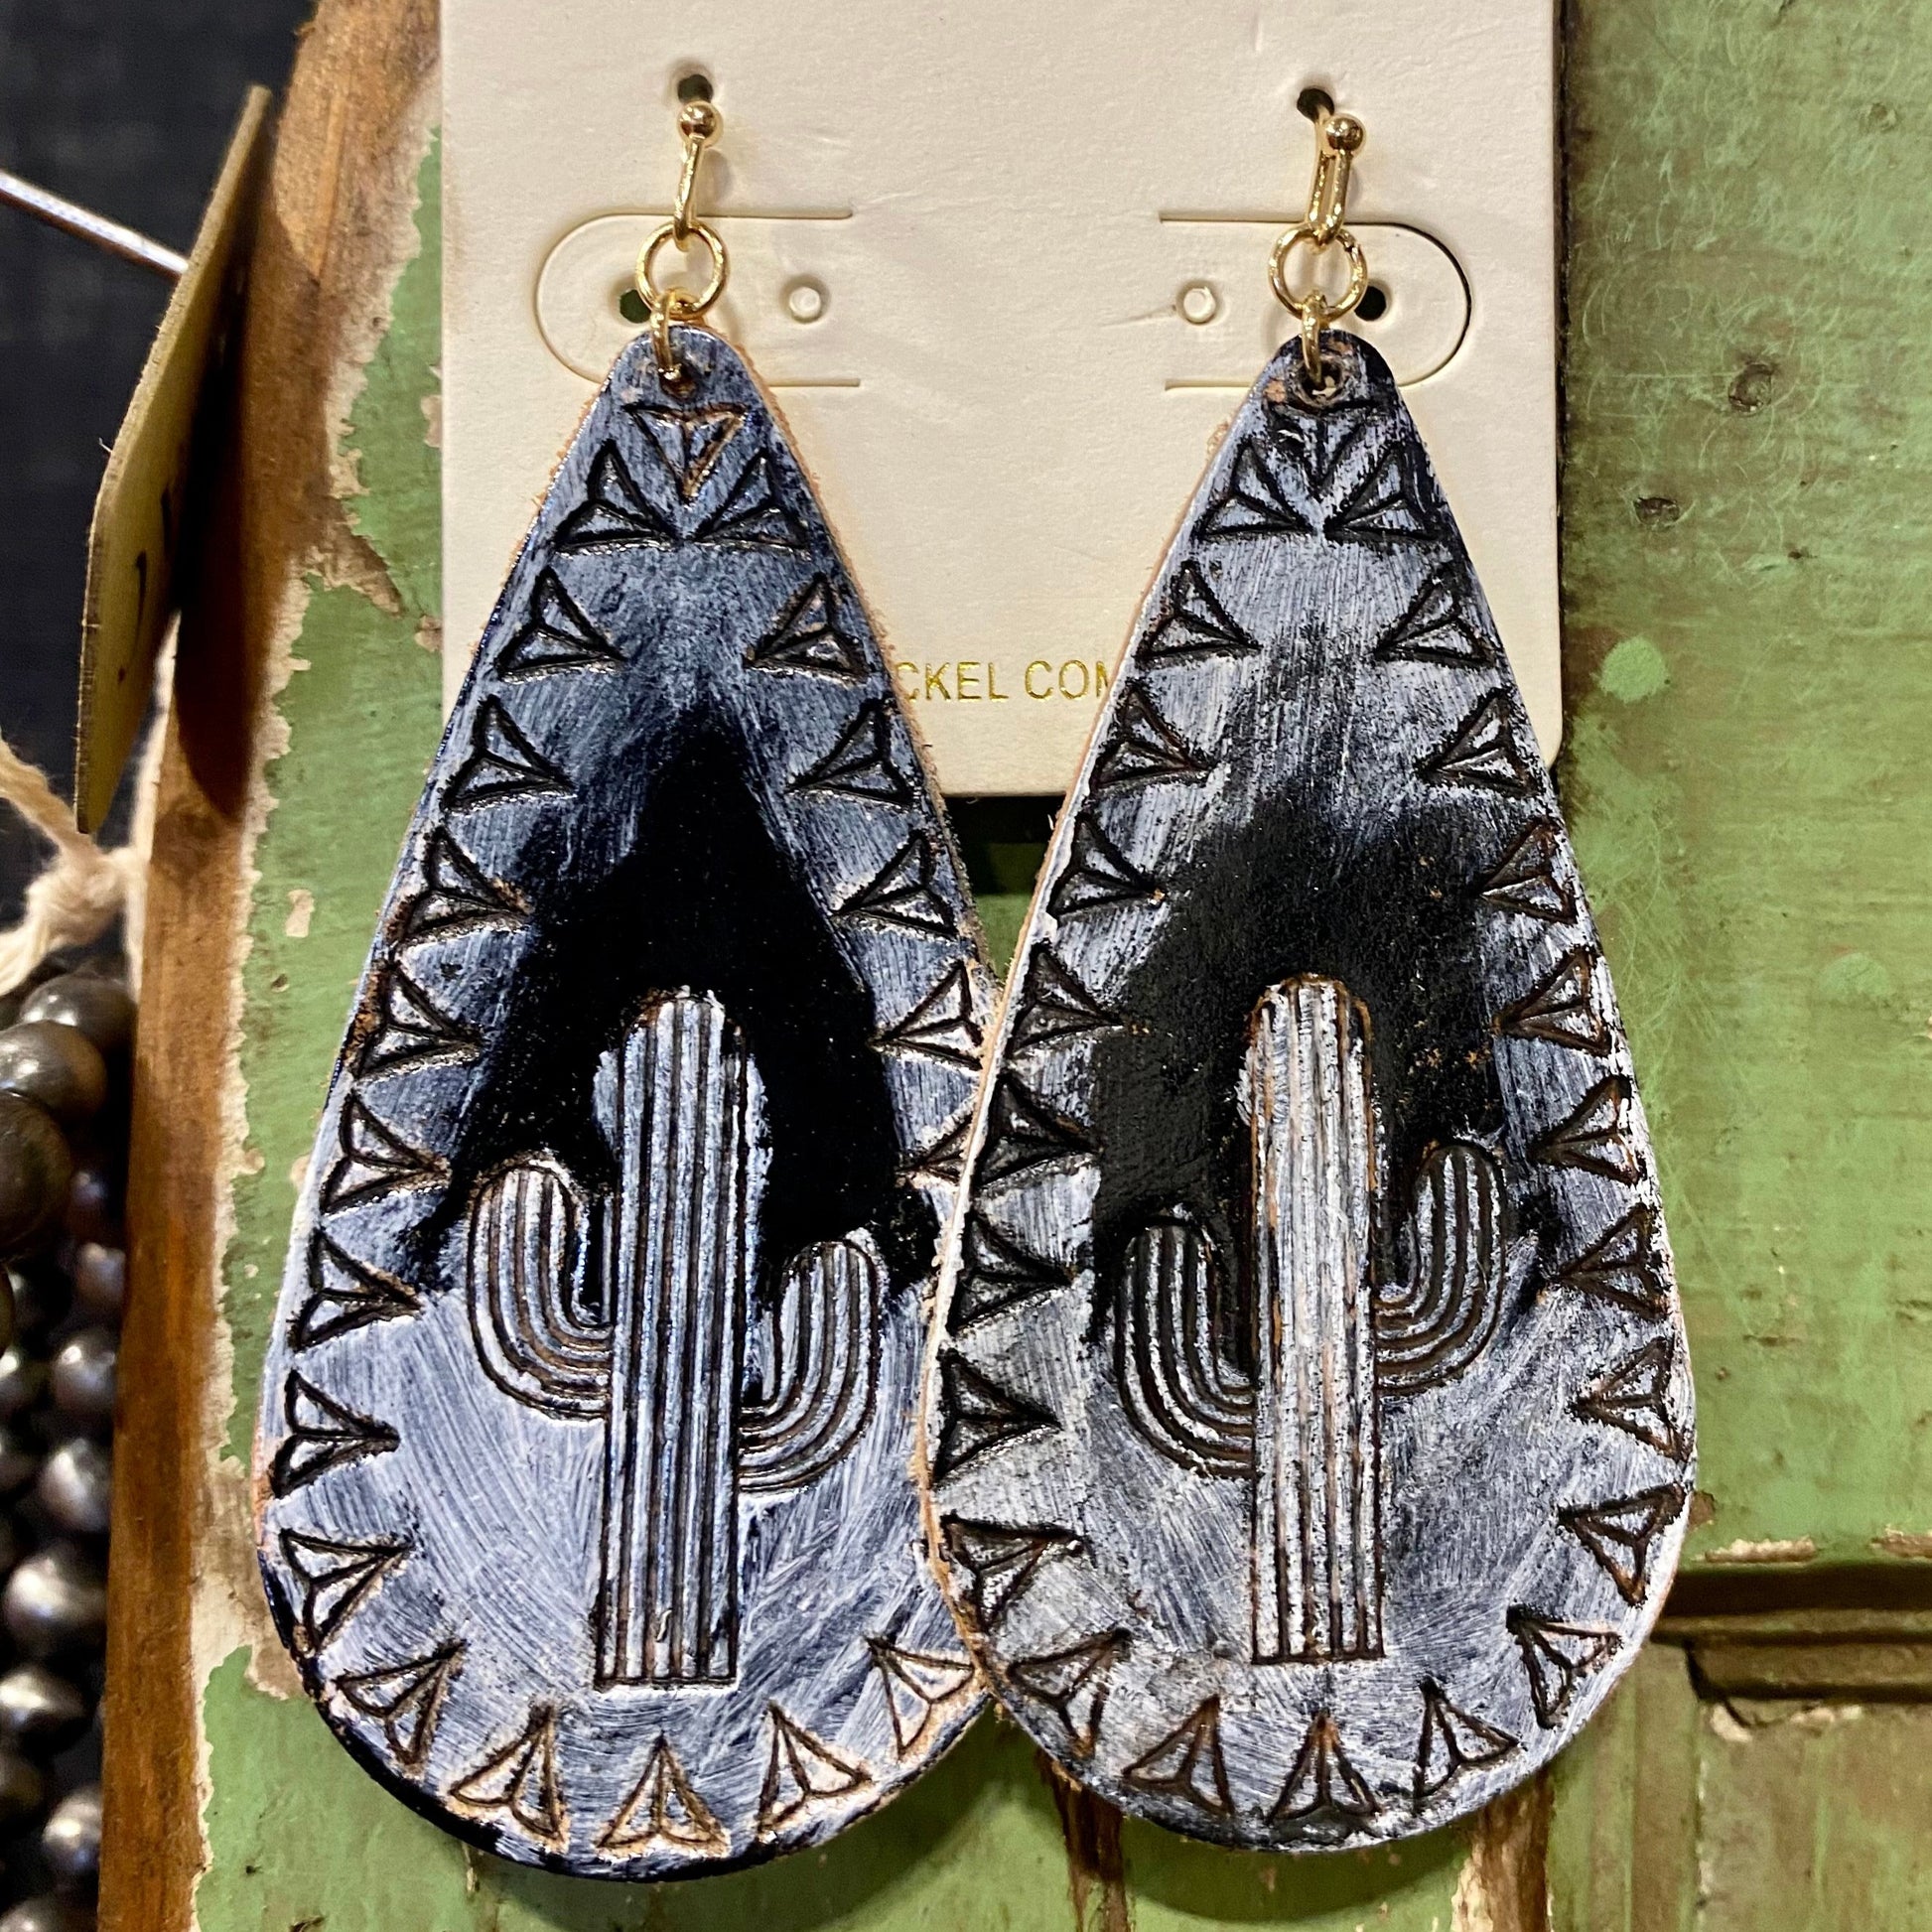 Lightweight black and grey large beautiful long cactus western hook earrings. These are sure to make a statement with any outfit. Rodeo Earrings, Cowgirl Style Earrings, Western Fashion Accessories, Large Statement Earrings, Affordable Western Earrings, $10 Earrings, Black and White Earrings, Cactus Jewelry Earrings